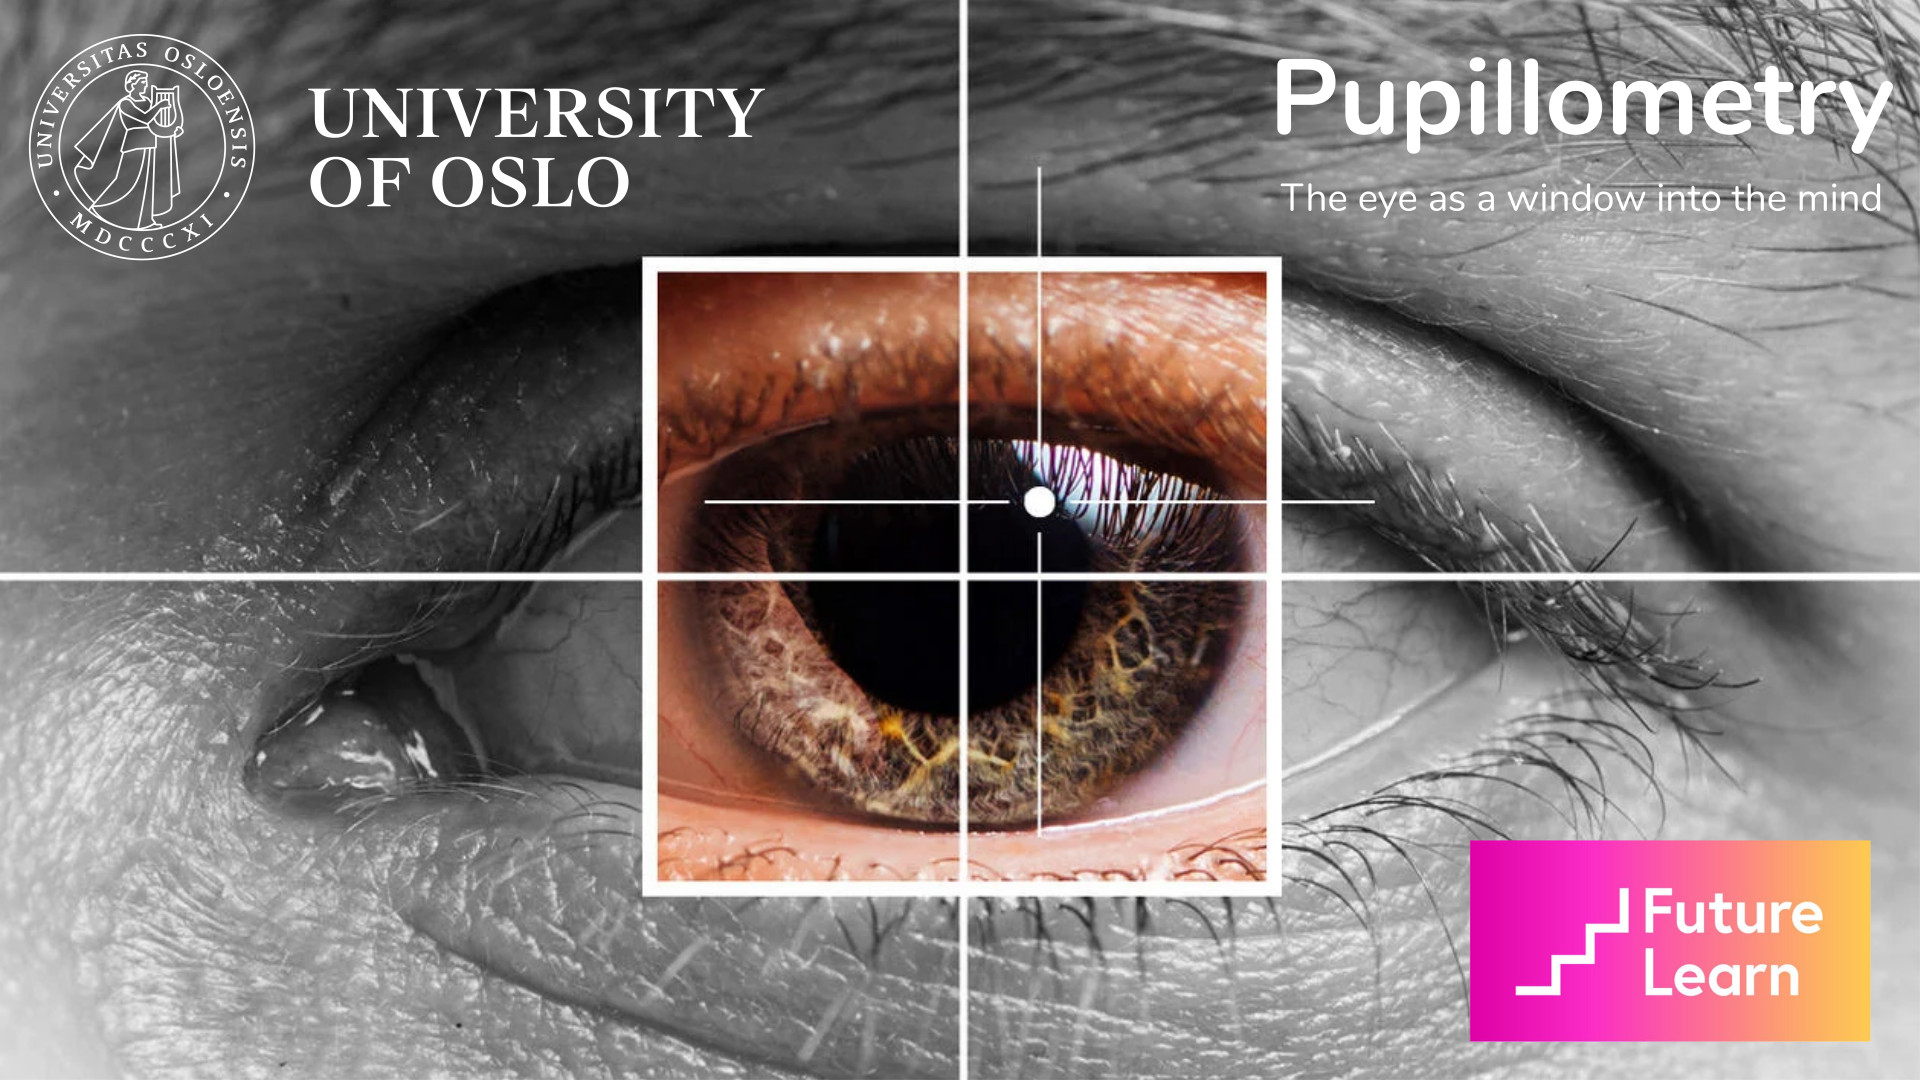 The course Pupillometry: The Eye as a Window Into the Mind was launched on the FutureLearn platform in December 2022 and will run with a continuous intake in the years to come.